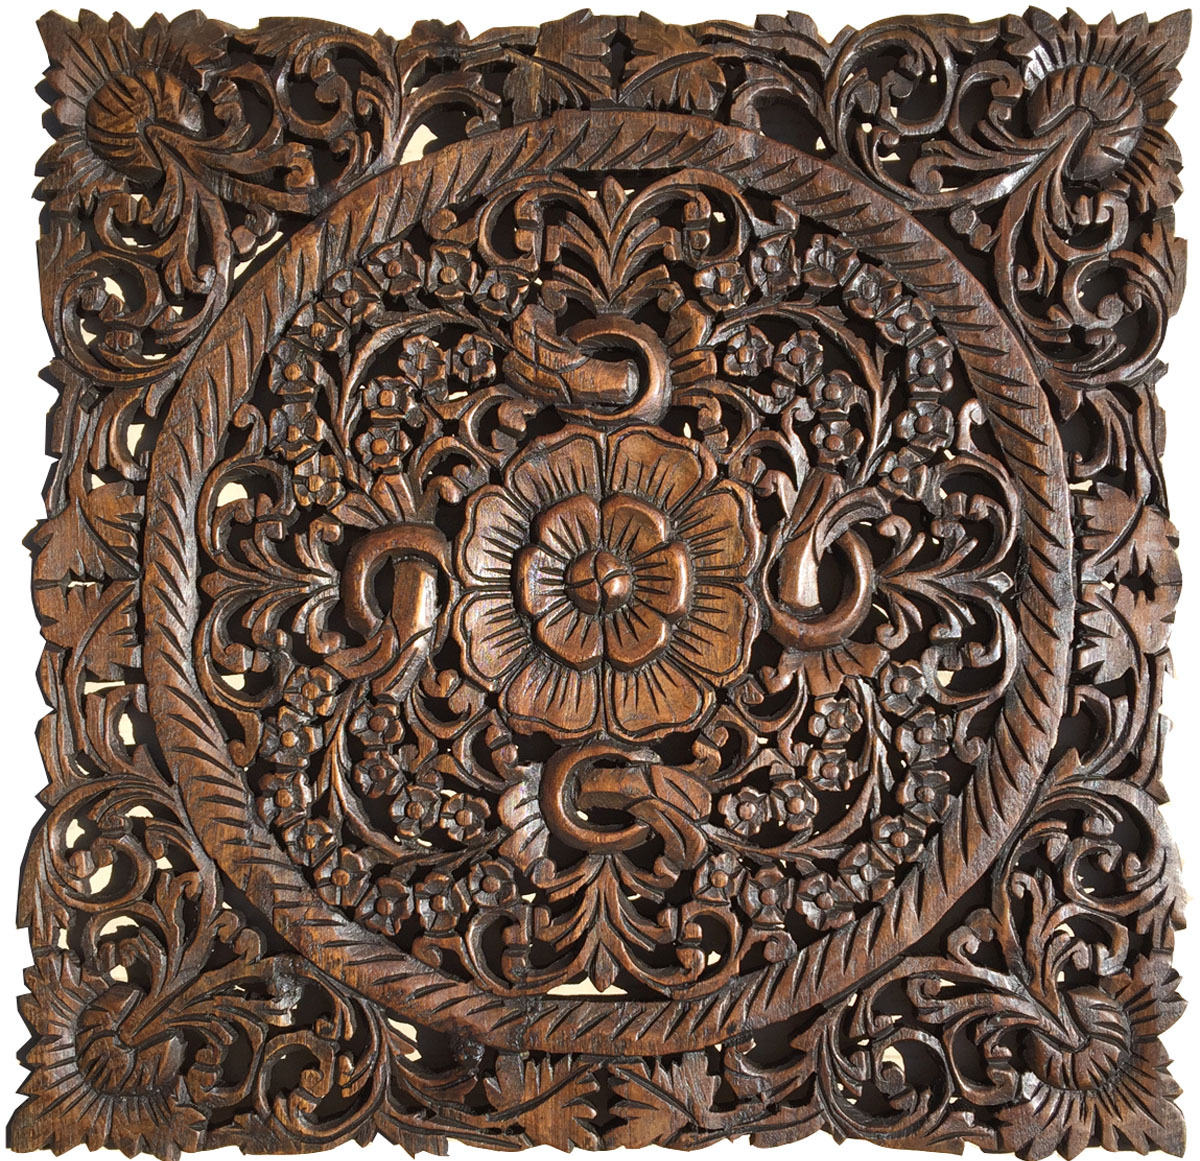 Carved Wood Wall Decor.Oriental Floral Wood Wall Art